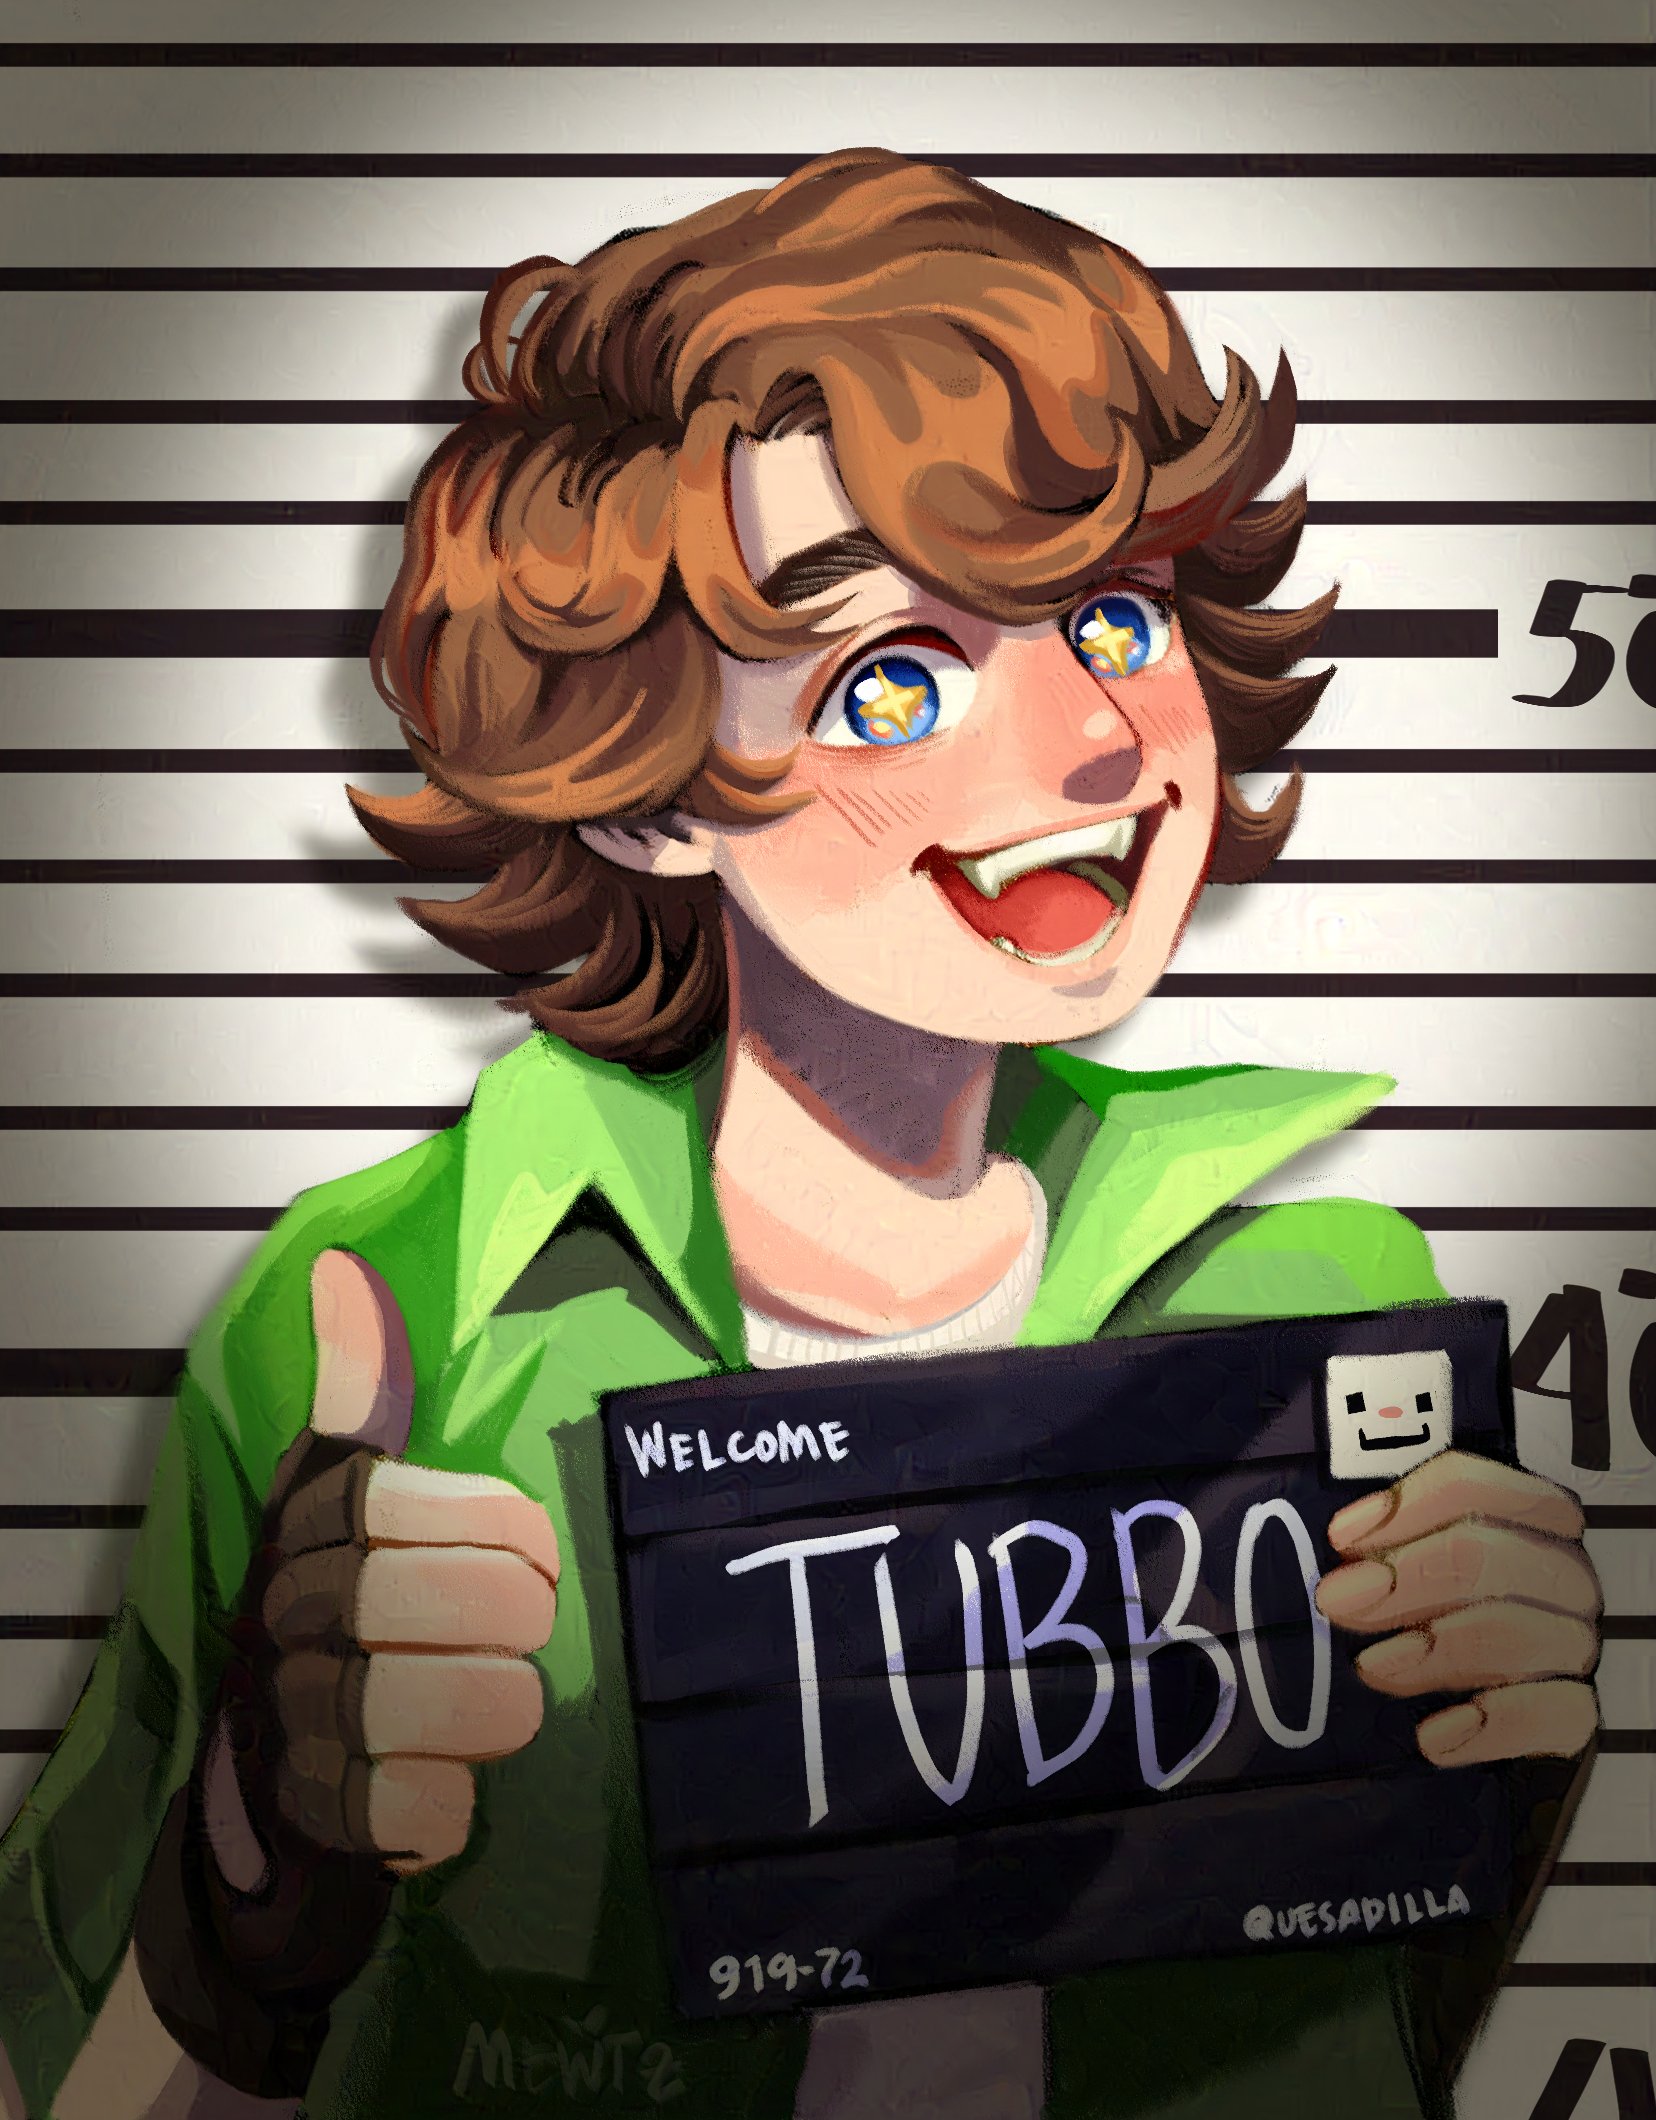 Welcome to the QSMP, Tubbo!